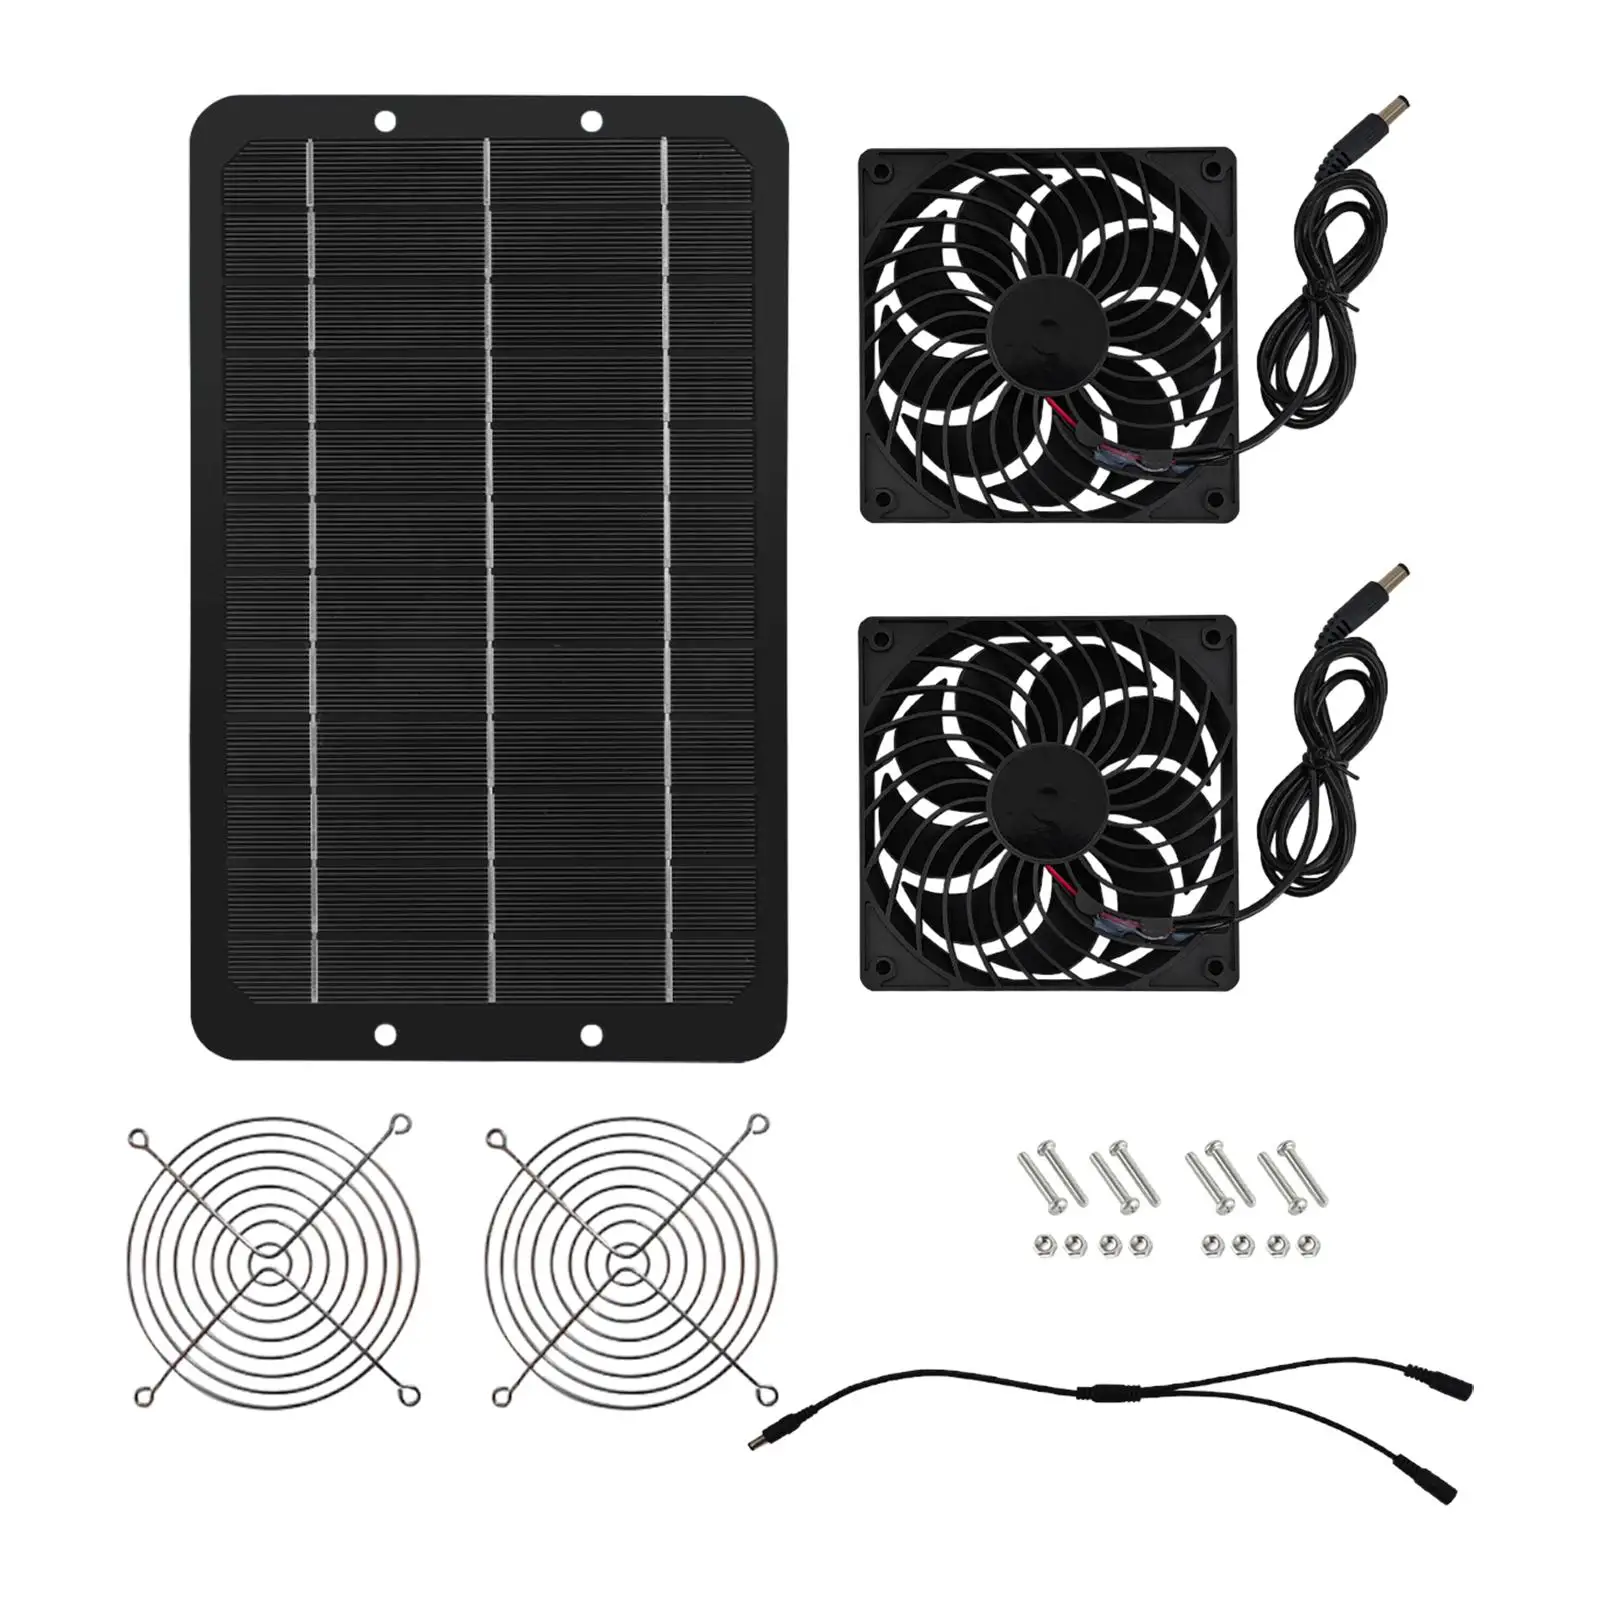 Solar Powered Panel Fan Waterproof Outdoor Double Fans Exhaust Fans Energy Saving for Pet Houses Yacht RV Camping Chicken Coop